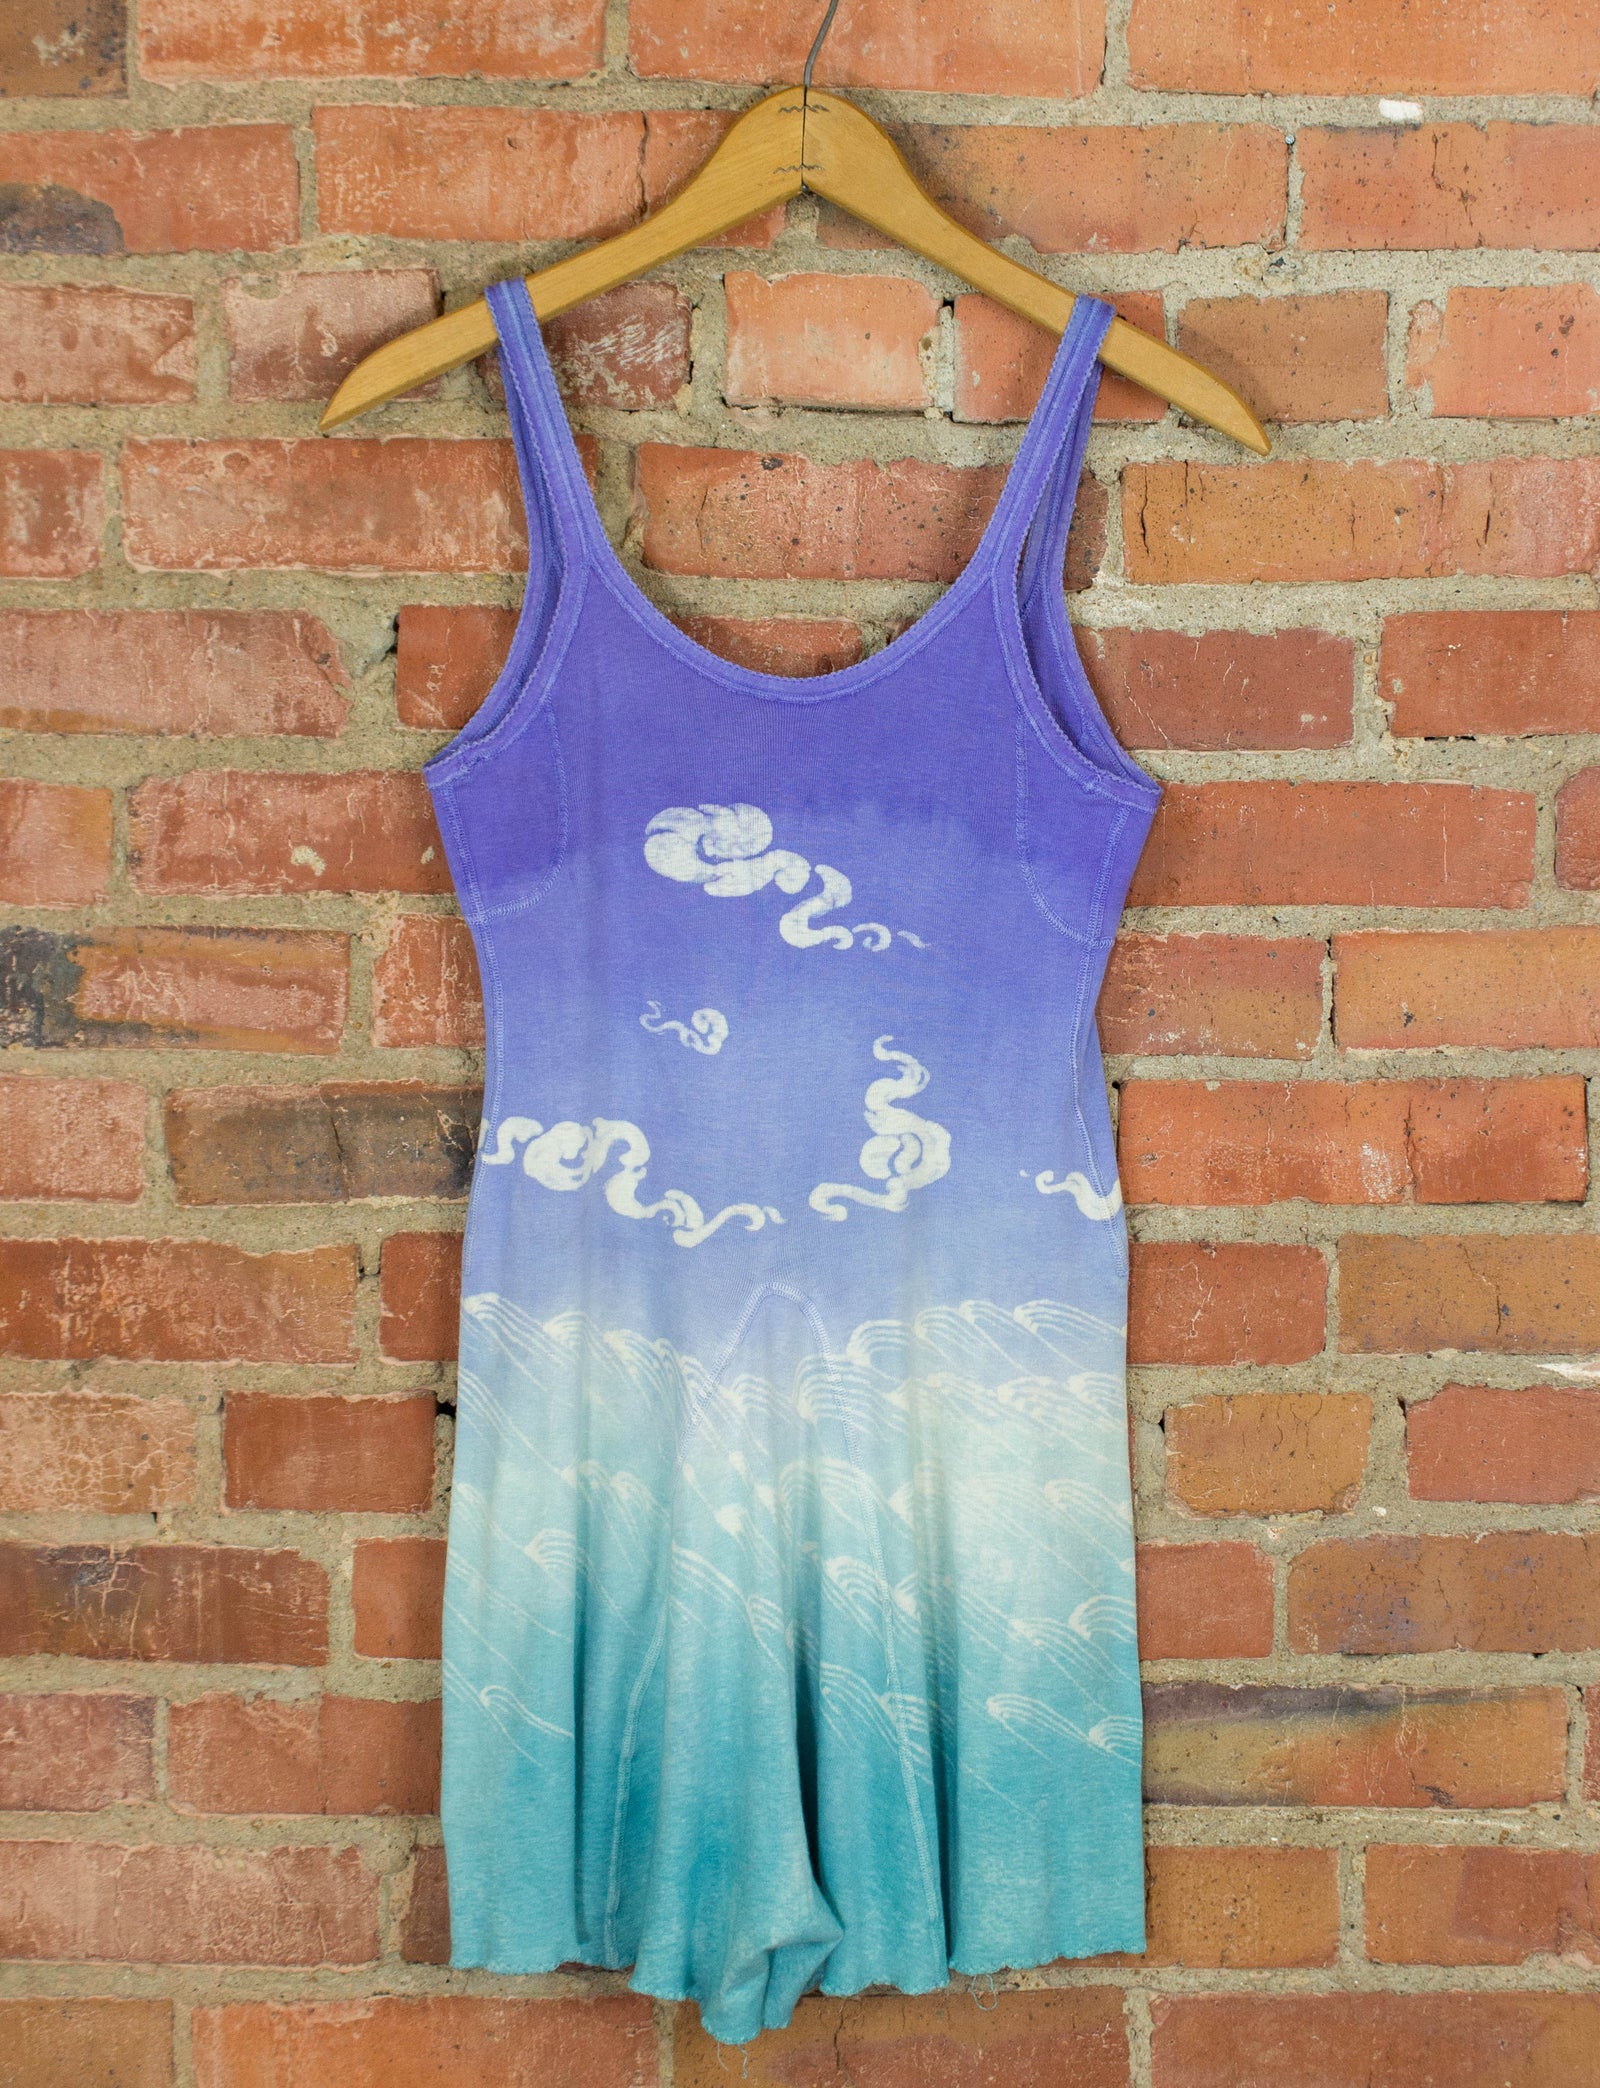 Vintage Mihitabel Women's Tie Dye Romper 60s Purple and Aqua With Cloud and Wave Designs Small